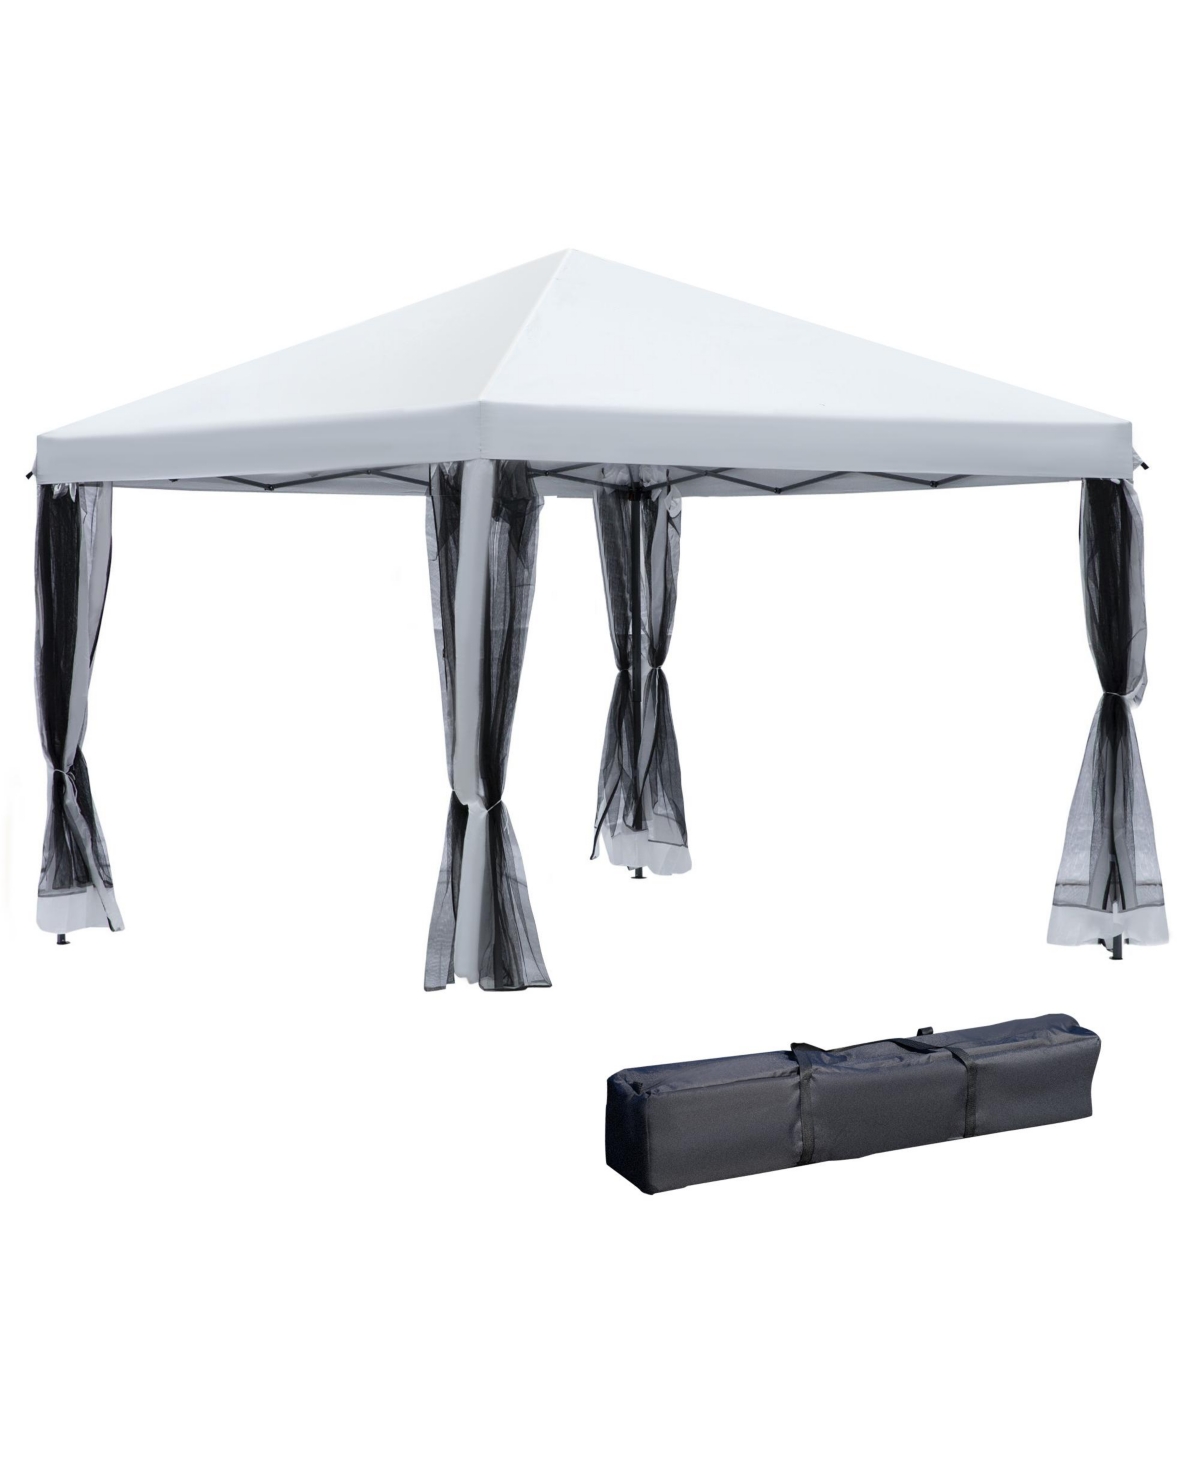 10' x 10' Pop-up Canopy Vendor Tent with Removable Mesh Walls, Easy Setup Design & Travel Bag Included White - White